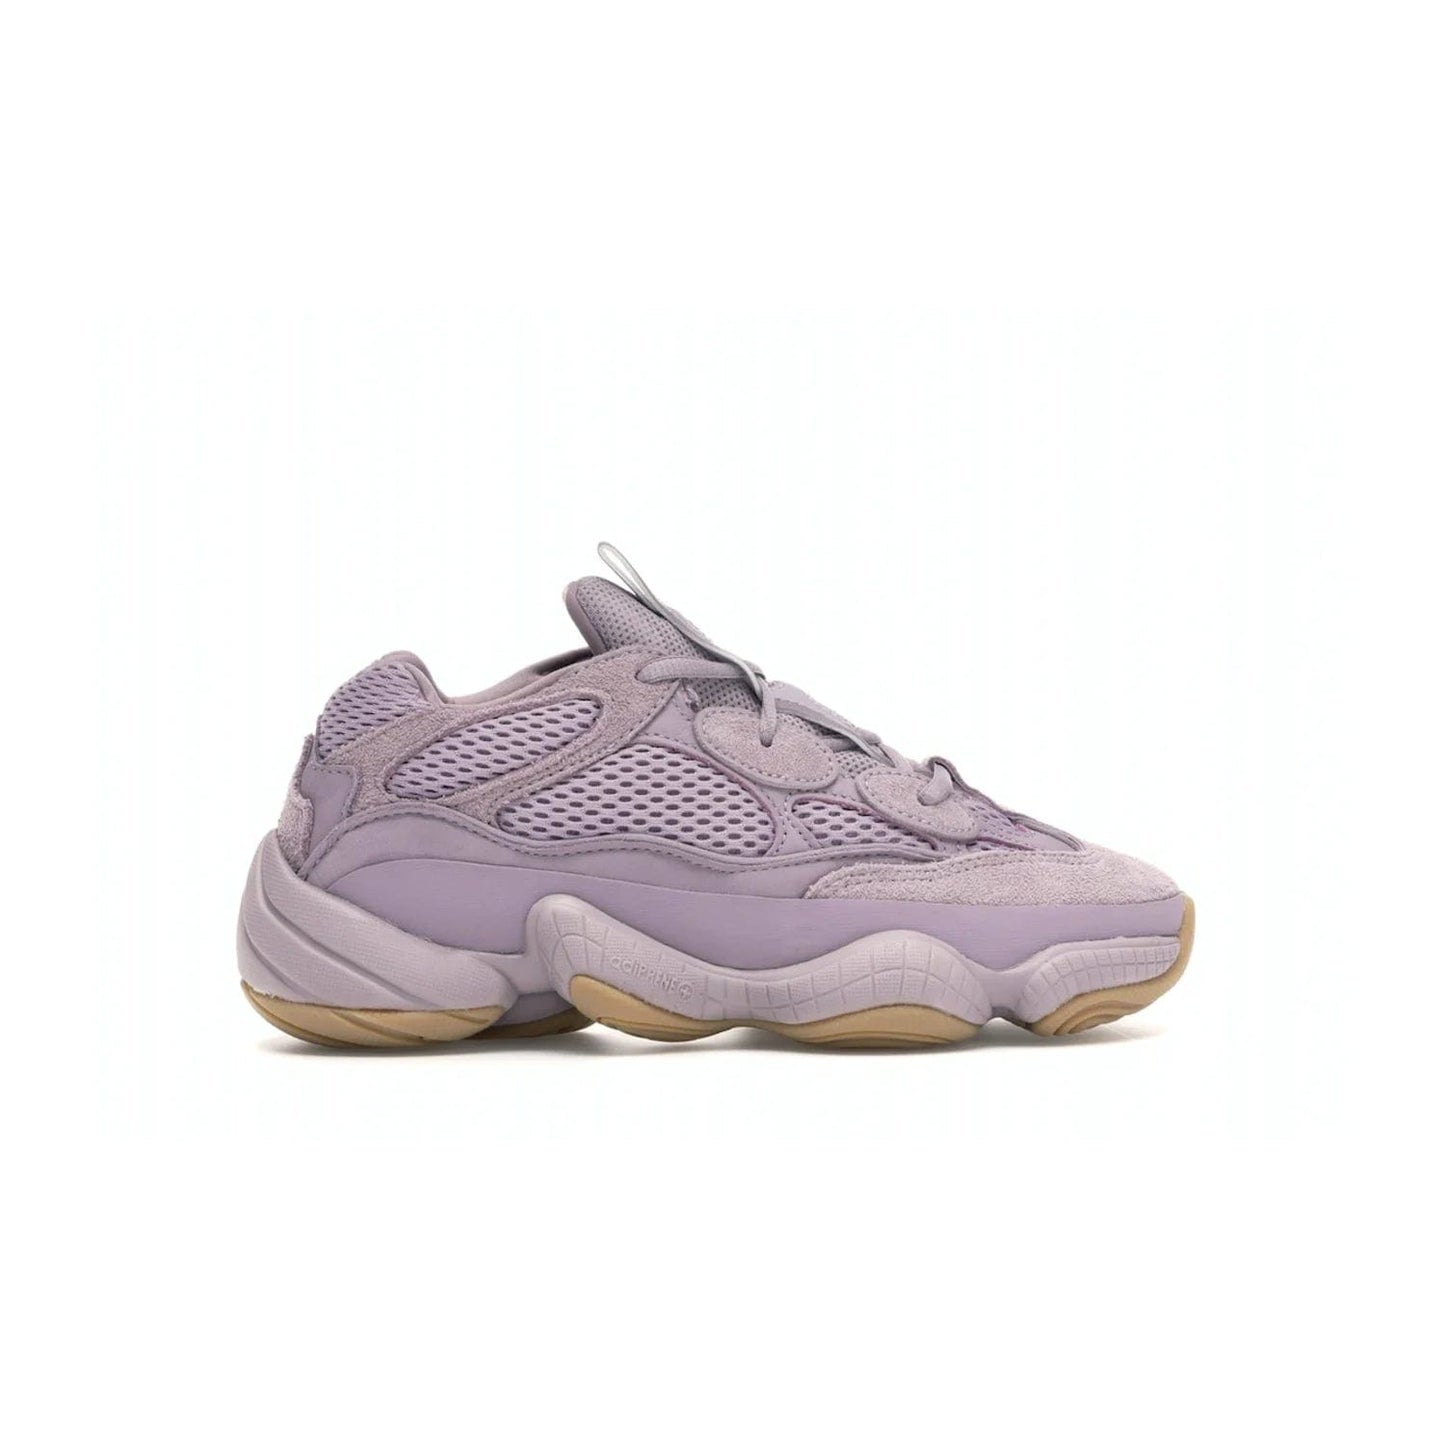 adidas Yeezy 500 Soft Vision - Image 36 - Only at www.BallersClubKickz.com - New adidas Yeezy 500 Soft Vision sneaker featuring a combination of mesh, leather, and suede in a classic Soft Vision colorway. Gum rubber outsole ensures durability and traction. An everyday sneaker that stands out from the crowd.